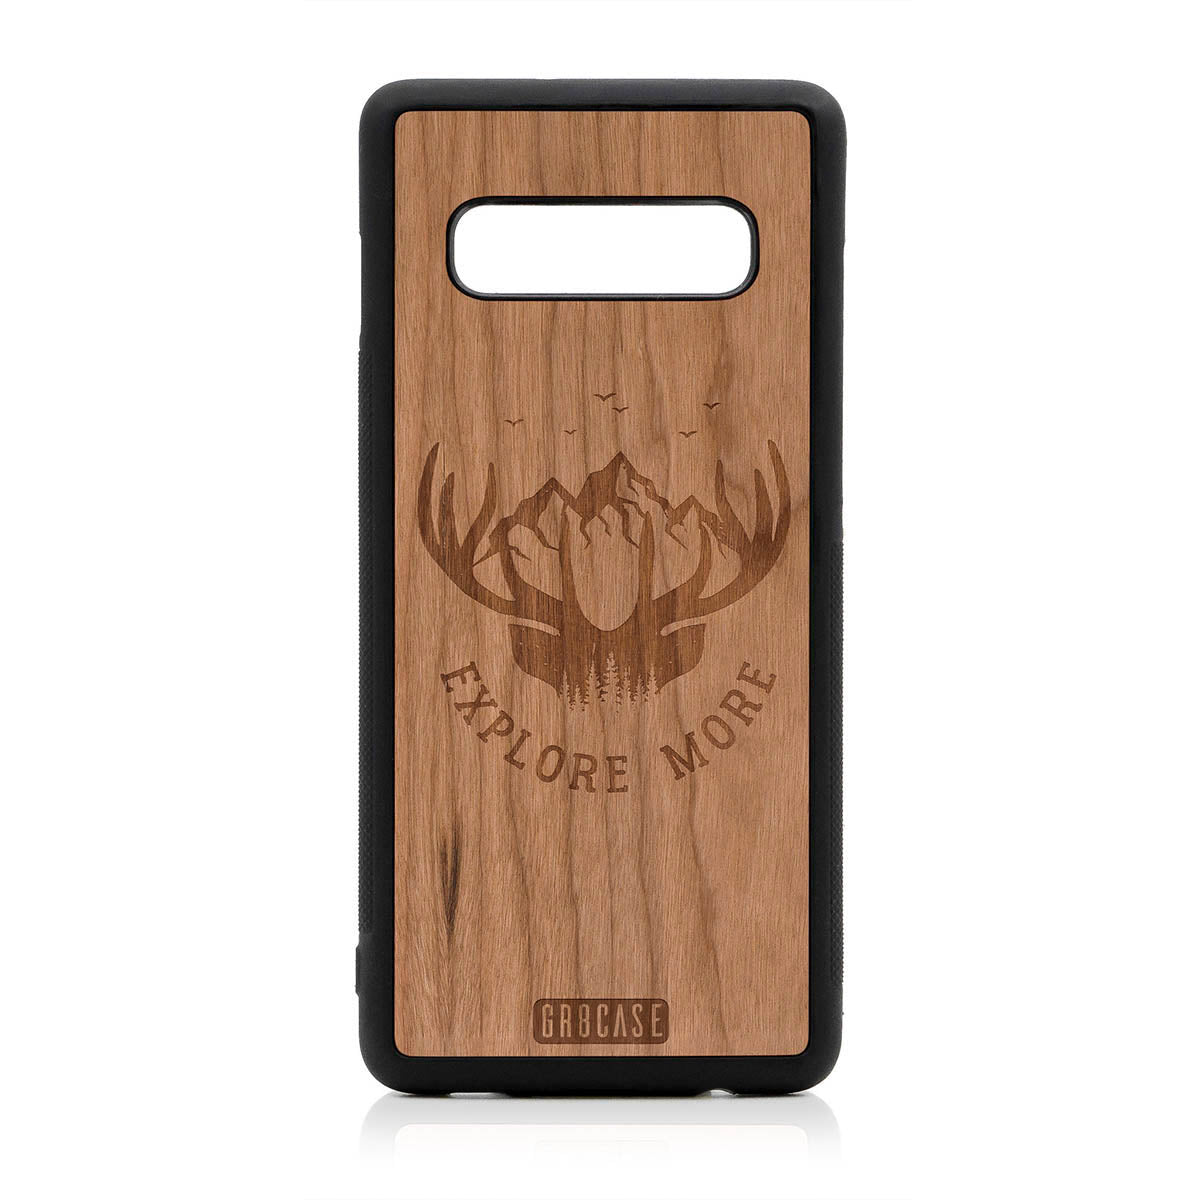 Explore More (Forest, Mountains & Antlers) Design Wood Case For Samsung Galaxy S10 Plus by GR8CASE